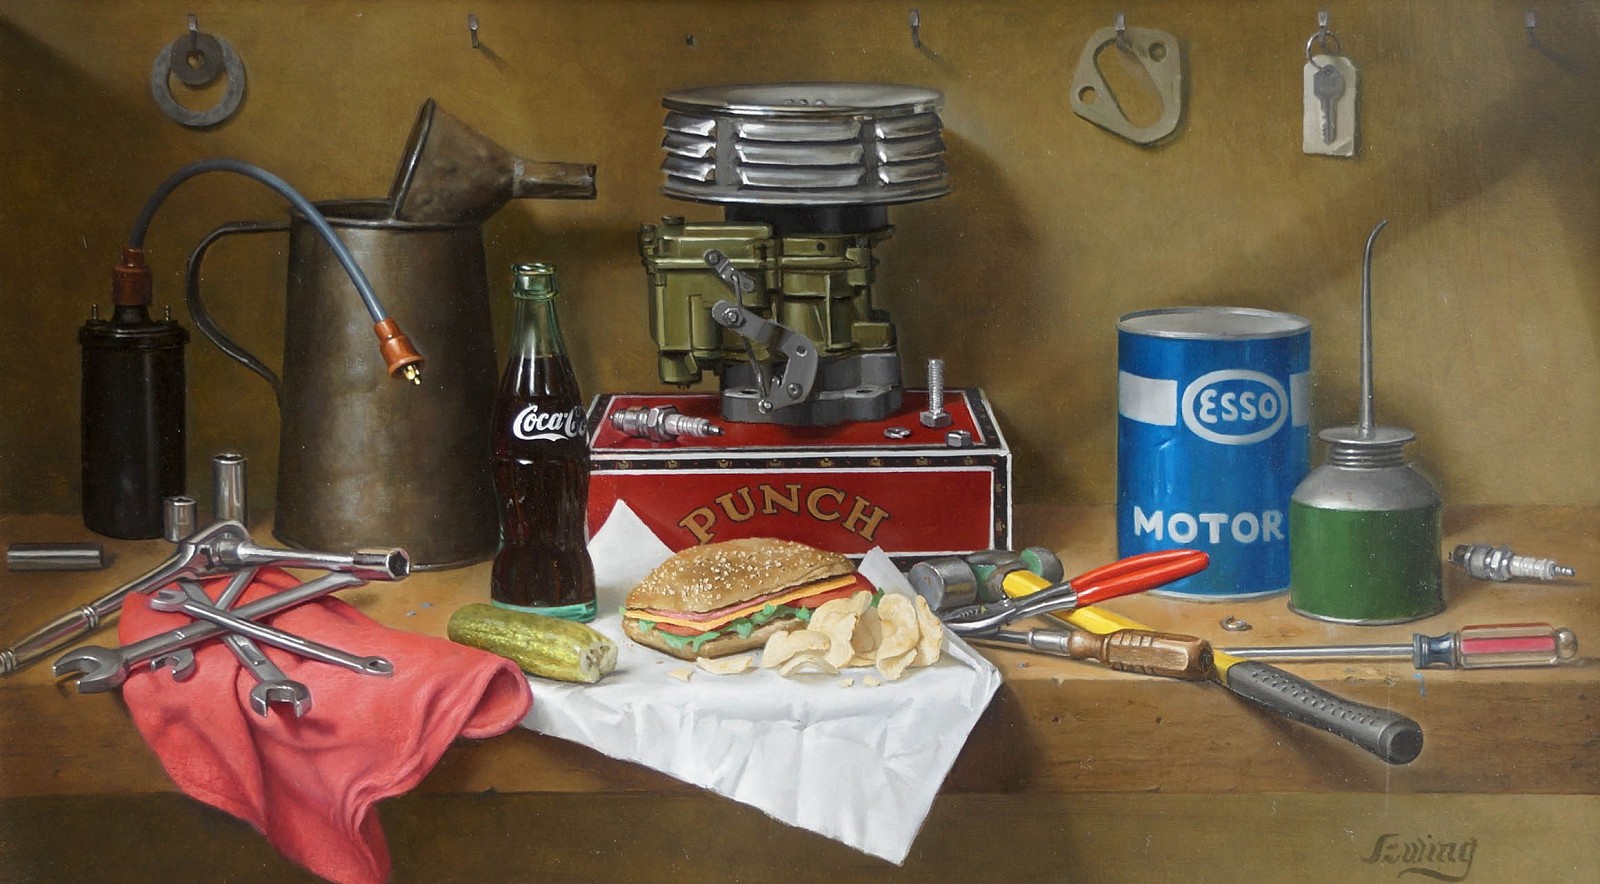 William O. Ewing, Lunchtime at the Car Shop
oil on wood, 19 1/2 x 34 1/2 in. (49.5 x 87.6 cm)
WE180403